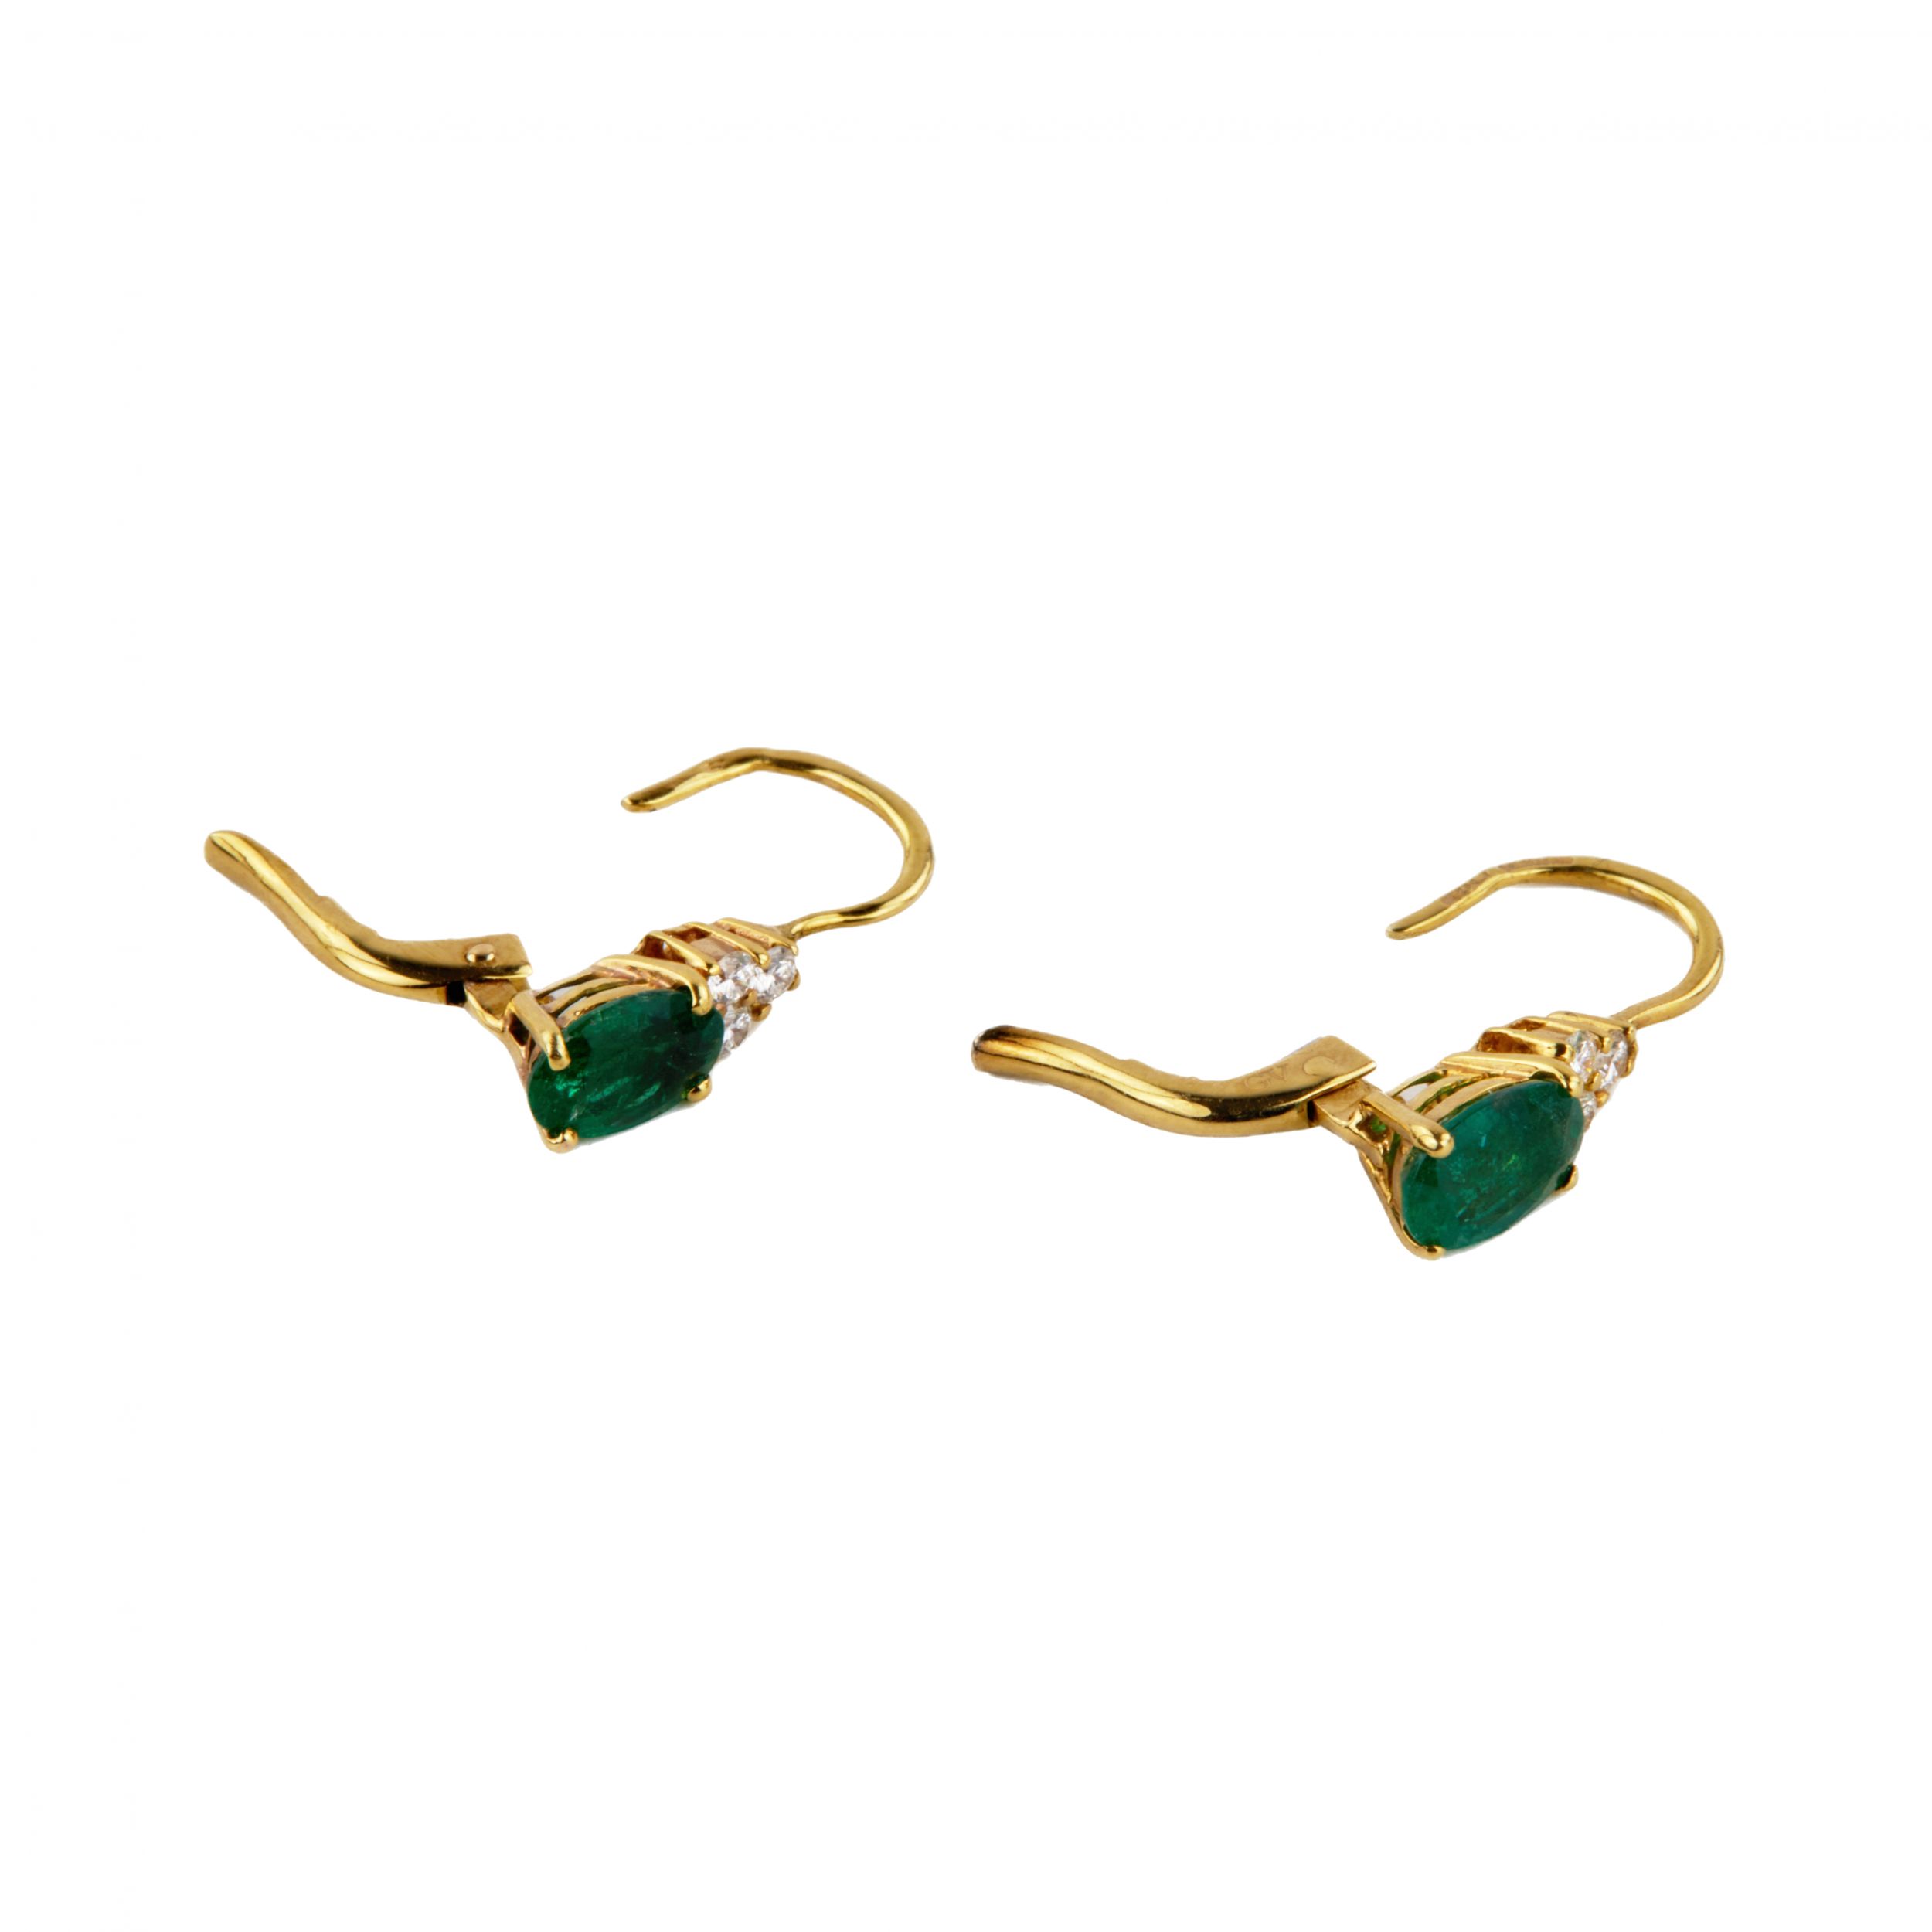 Giorgio Visconti. 18K gold pendant and earrings with emeralds and diamonds. - Image 3 of 8